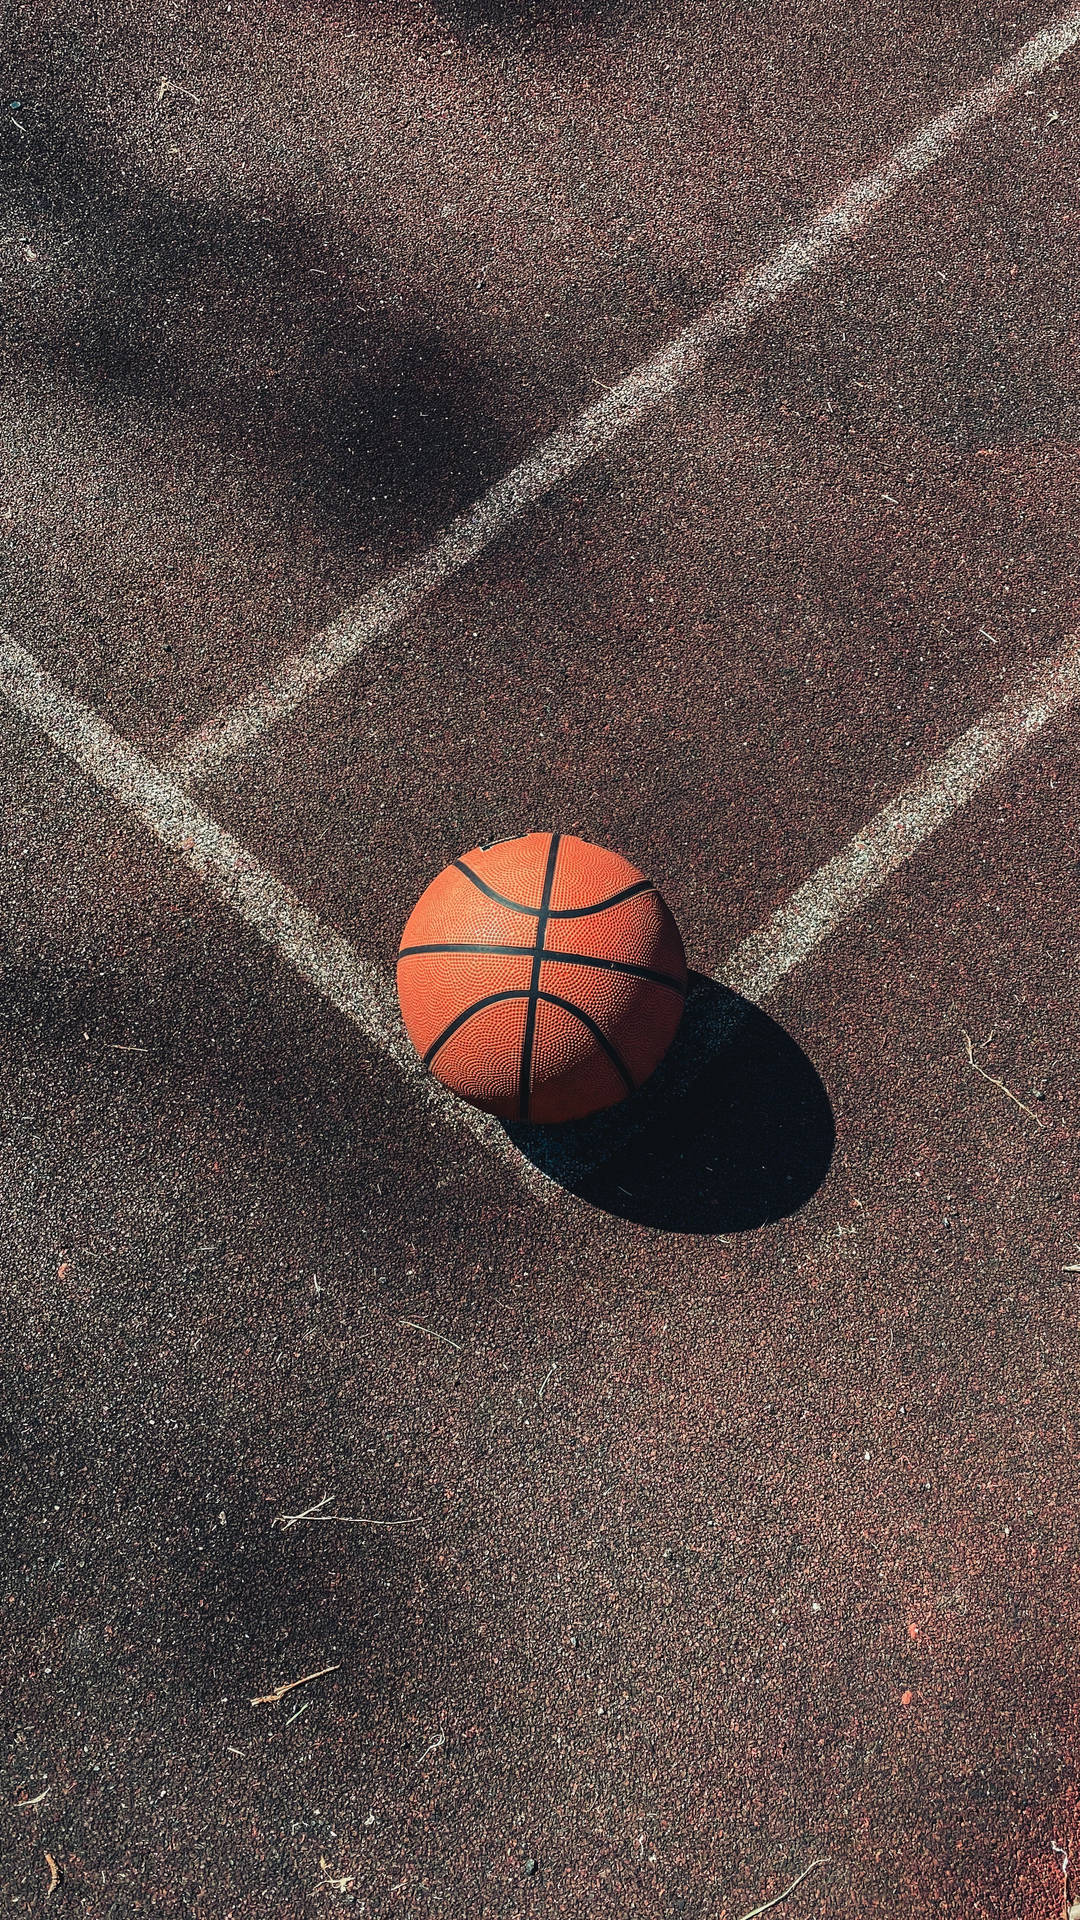 Ball On Concrete Basketball Court Background